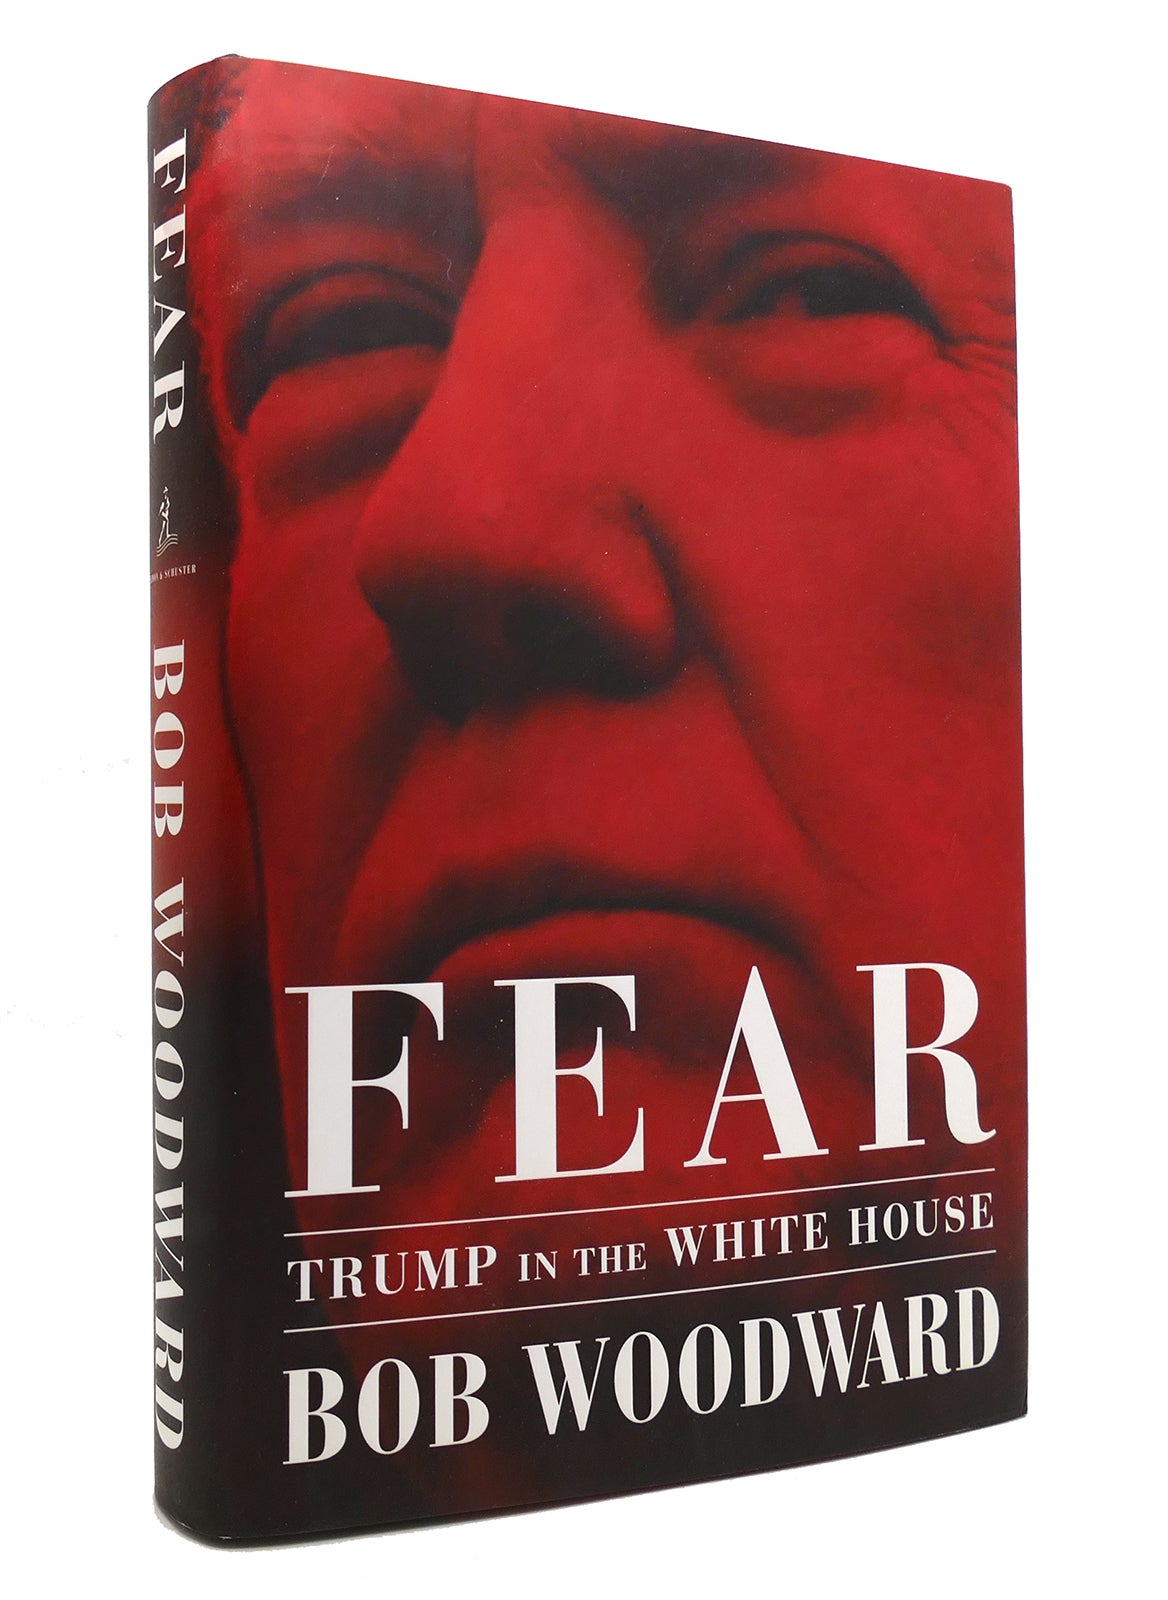 First　Trump　House　Printing　Bob　in　White　First　FEAR　Edition;　the　Woodward